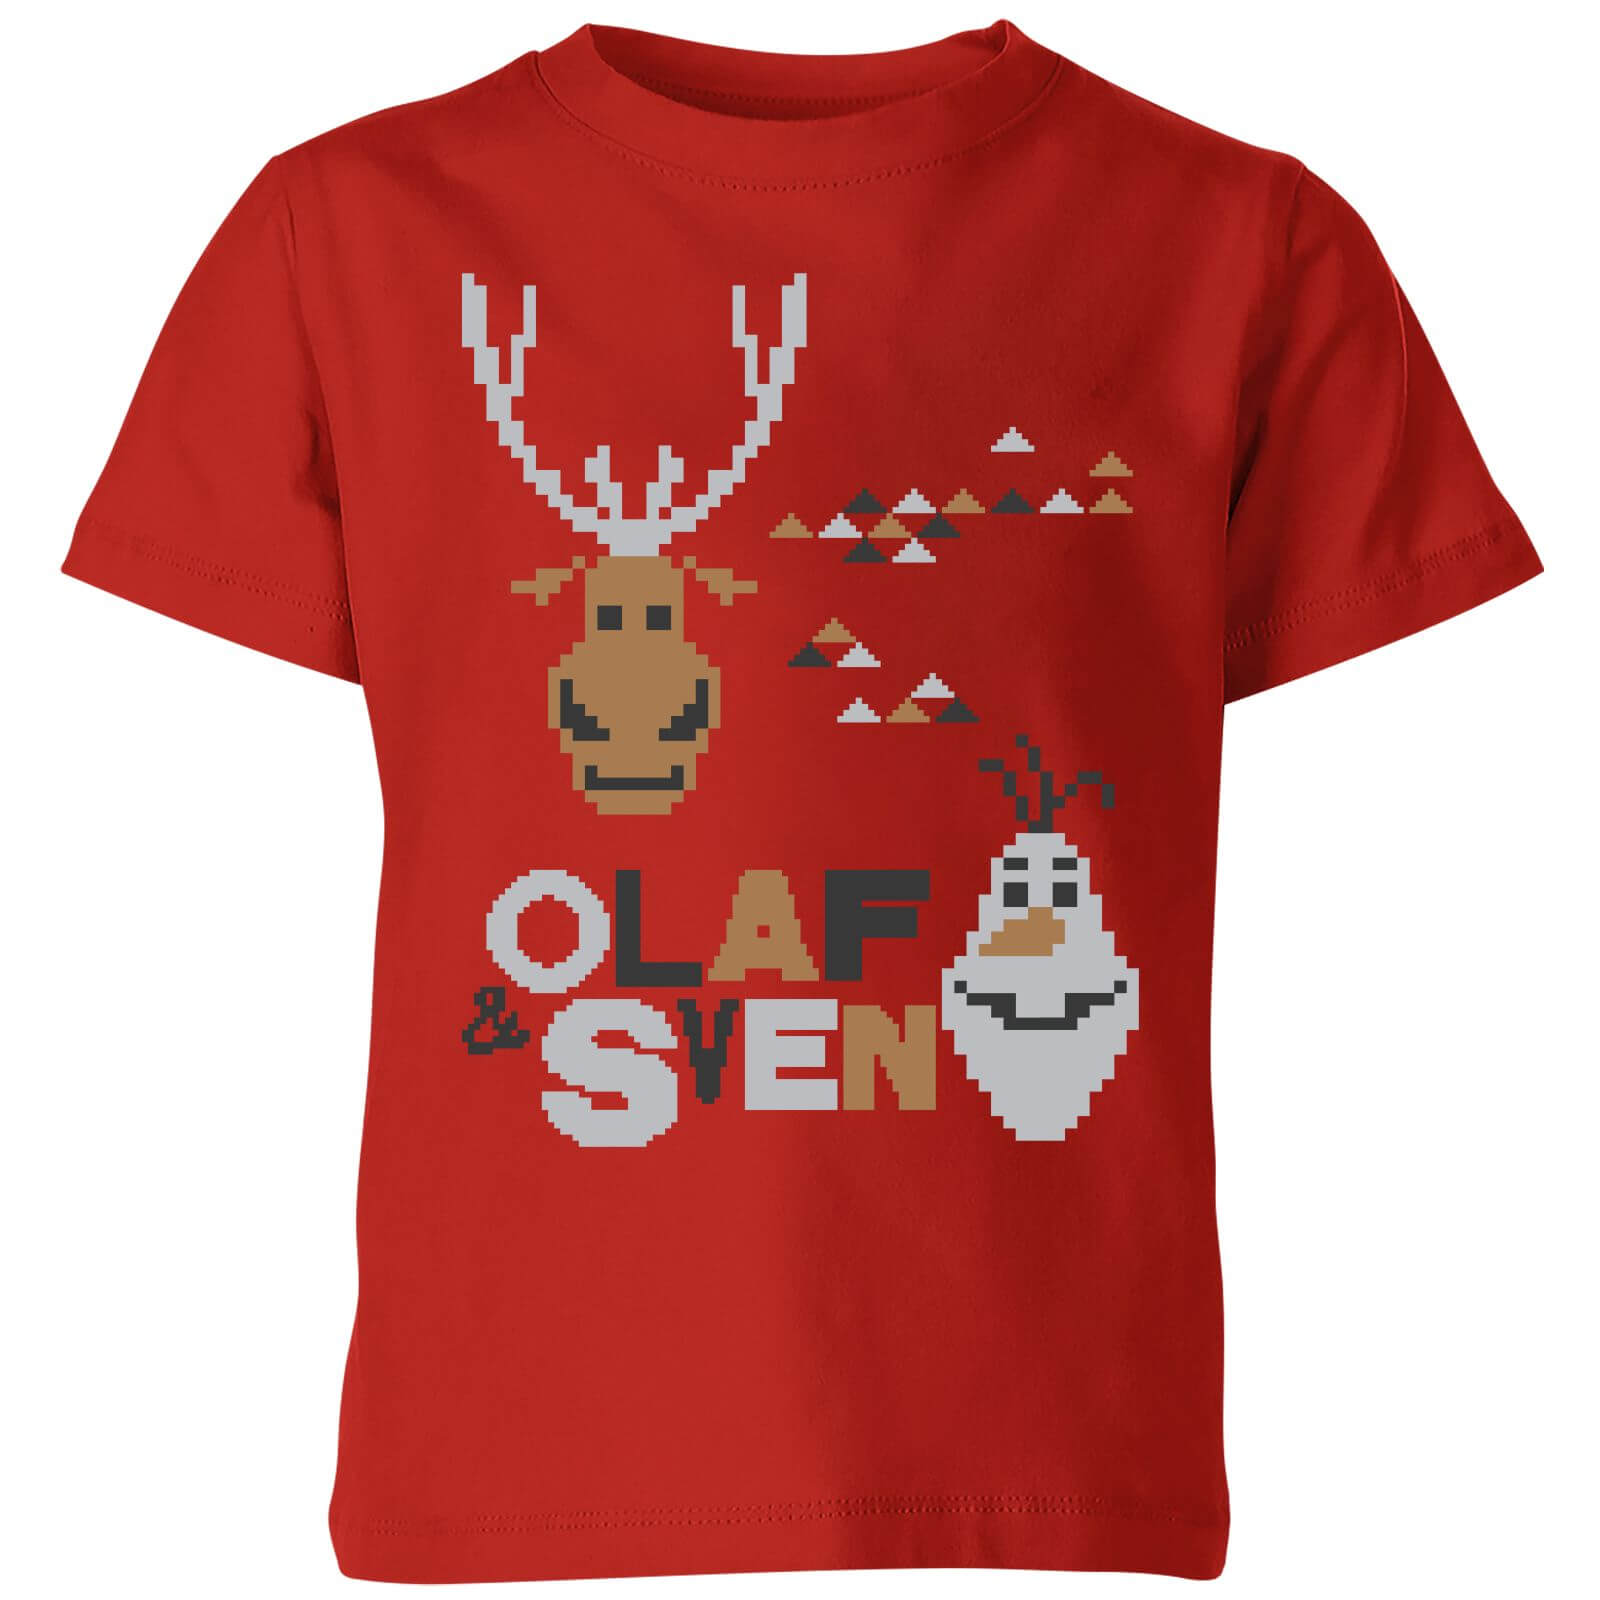 Disney Frozen Olaf And Sven Kids' Christmas T-Shirt - Red - 3-4 Years